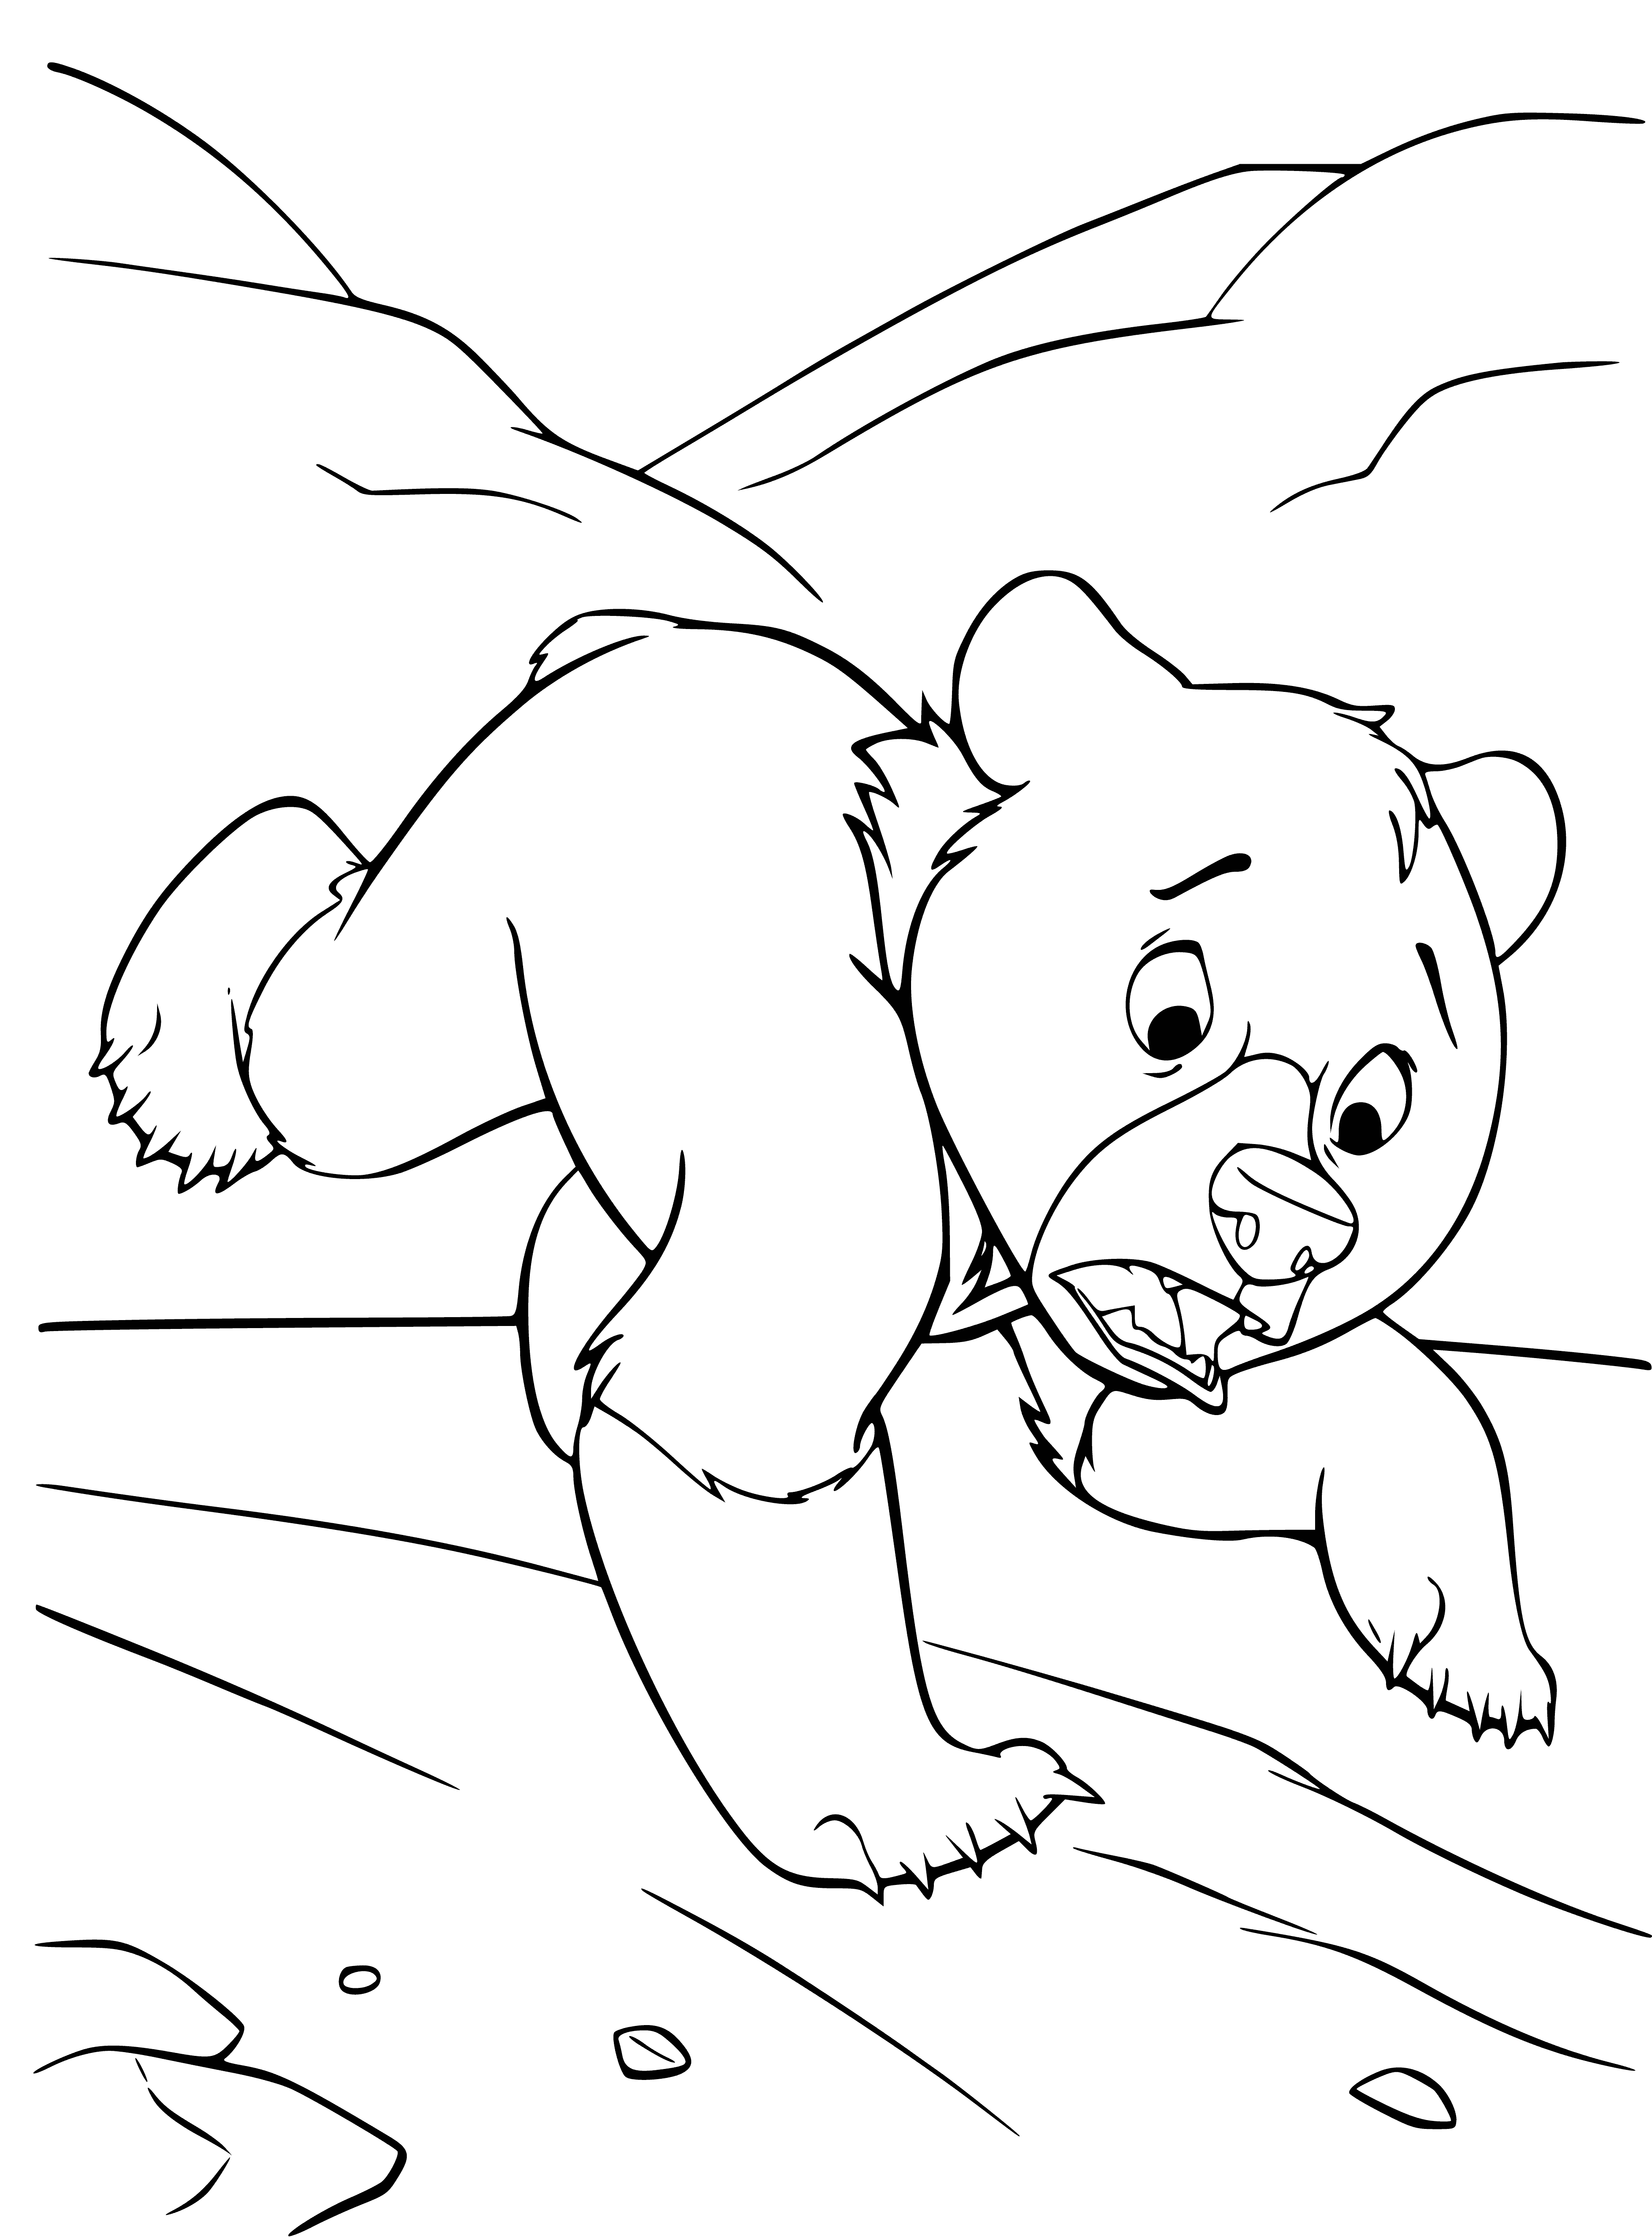 coloring page: Two bears use a computer, they both wear blue collars with a name tag that reads "Brother Bear."